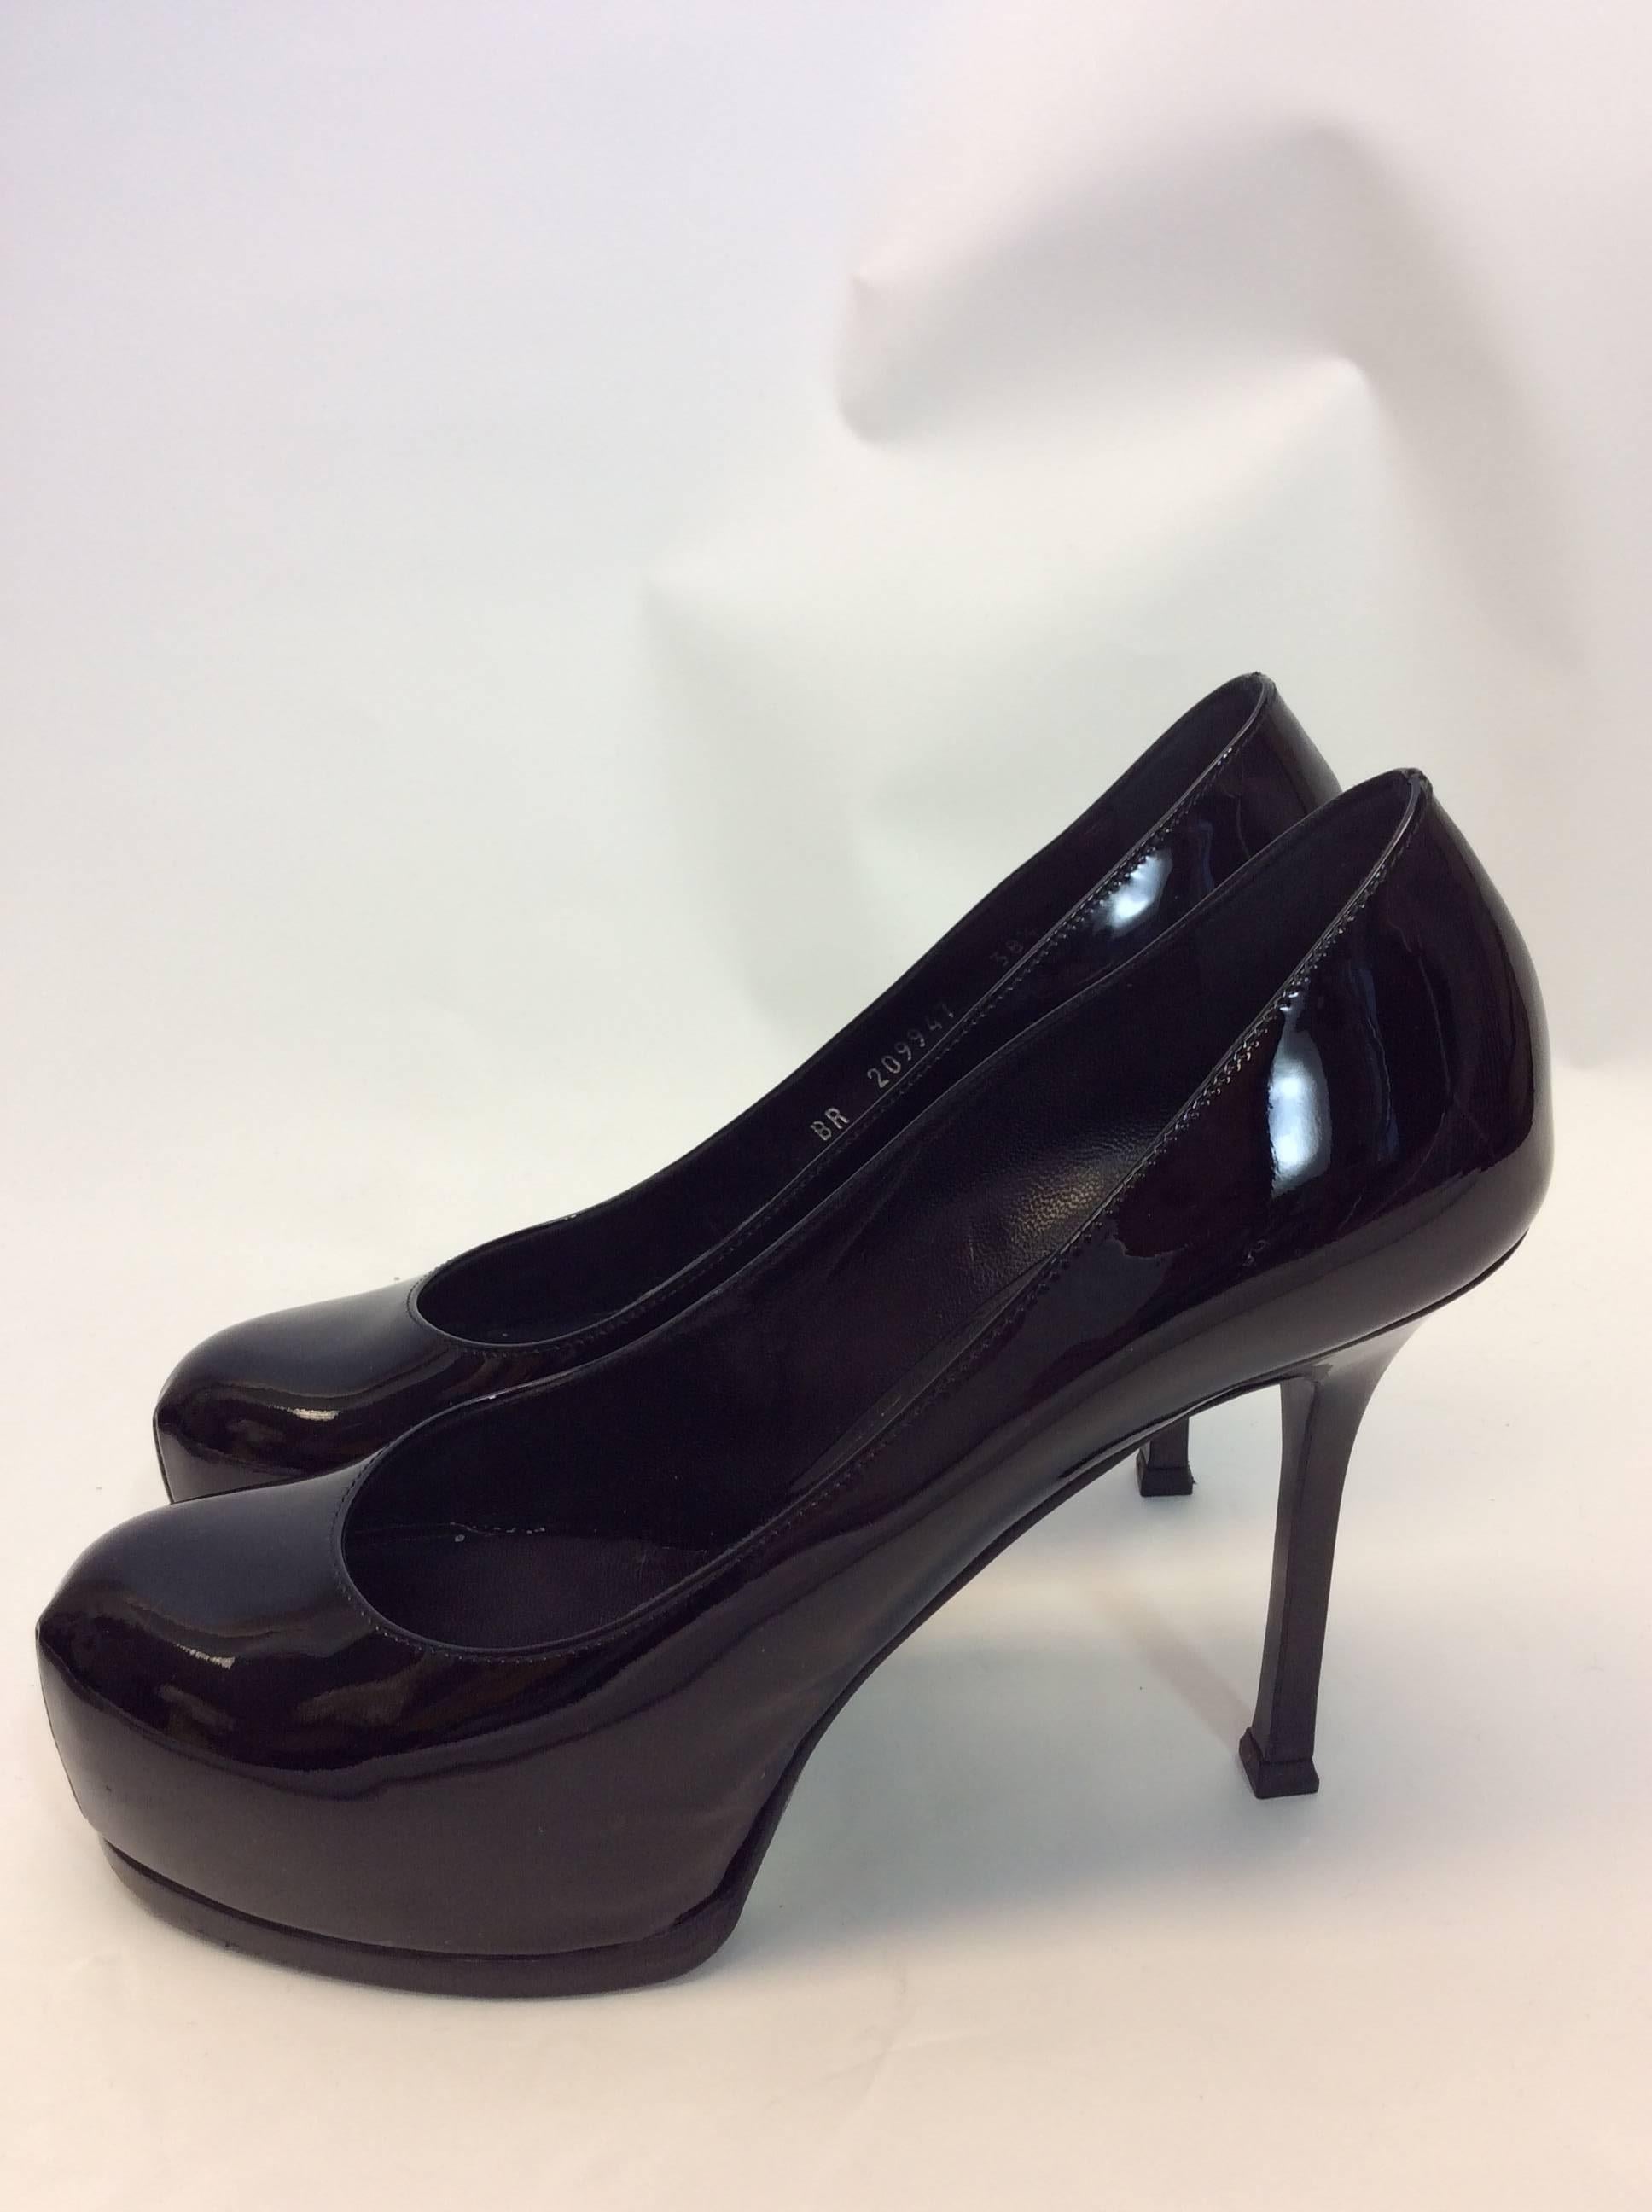 Yves Saint Laurent Patent Leather Black Stiletto
$495
4.5 inch heel
Made in Italy
Size 38.5